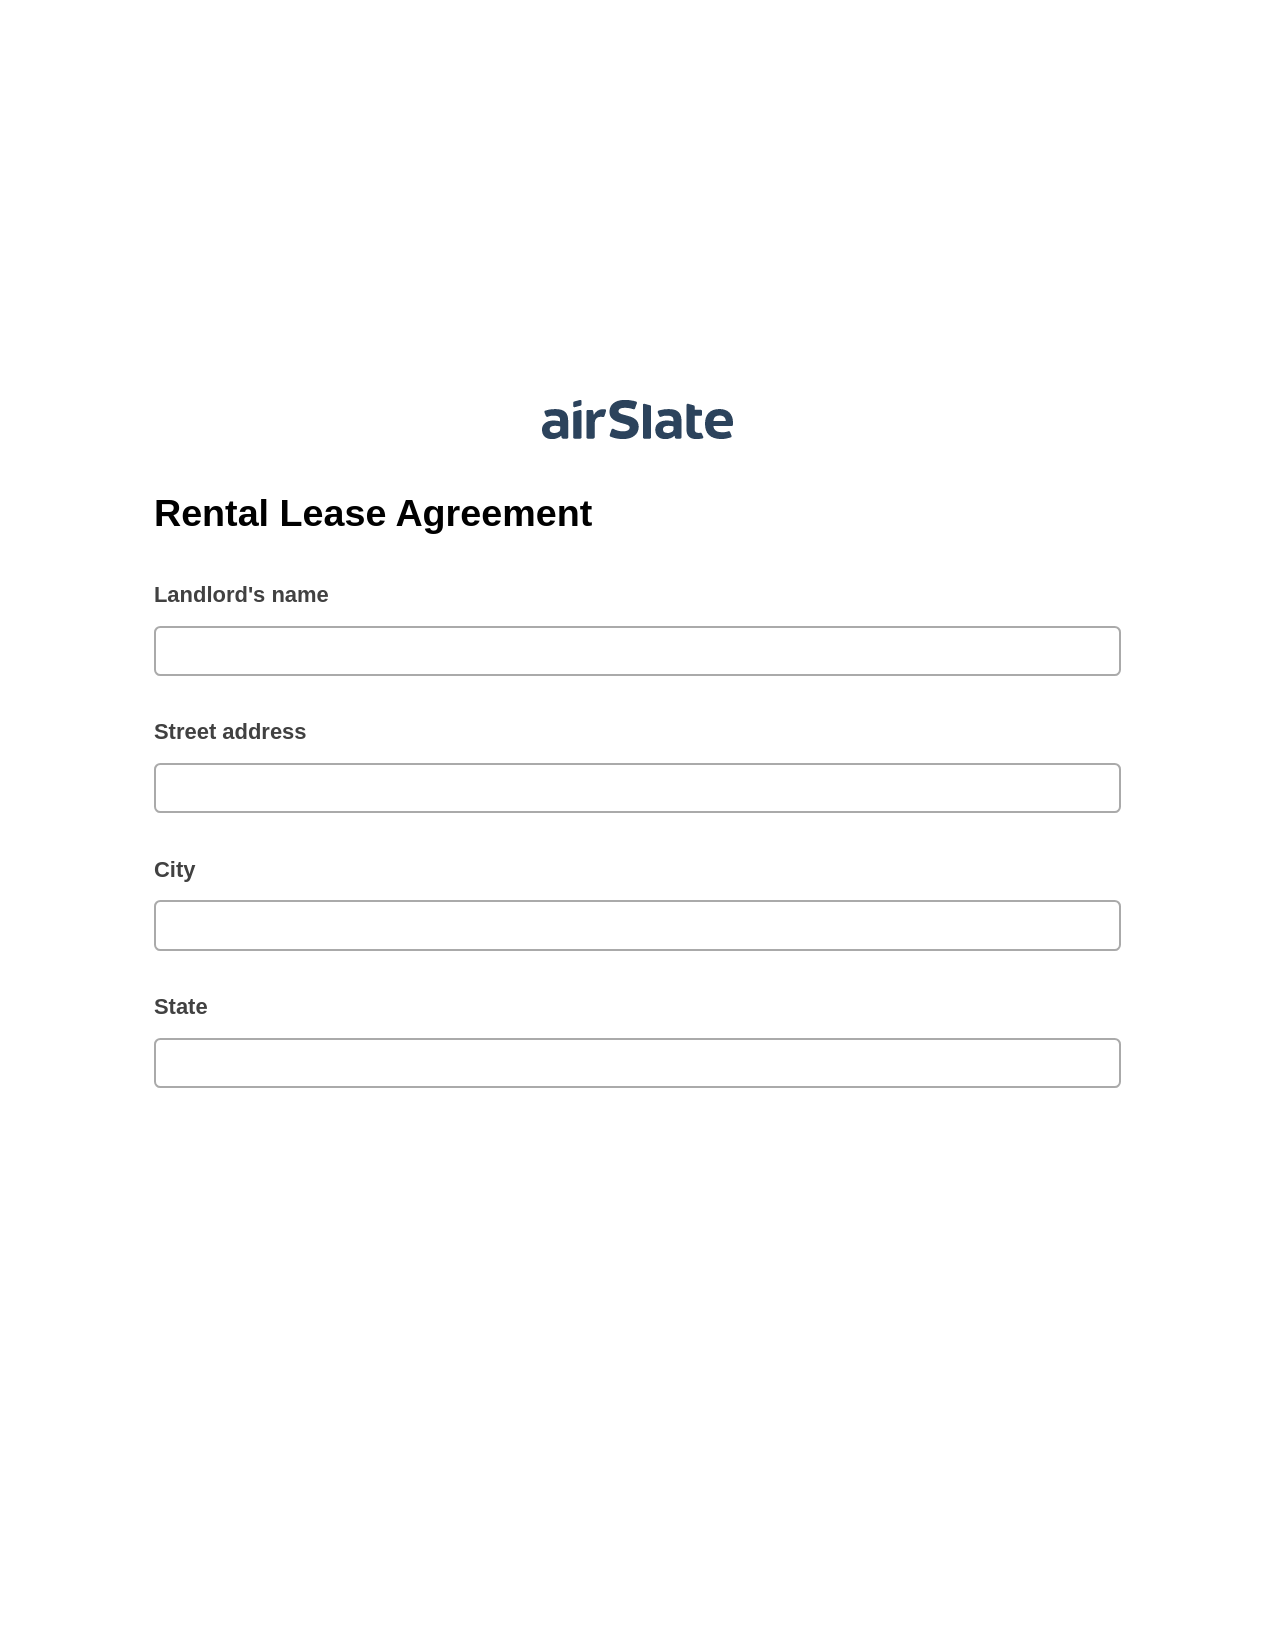 Rental Lease Agreement Pre-fill from CSV File Dropdown Options Bot, In-person Signing Bot, Export to MySQL Bot